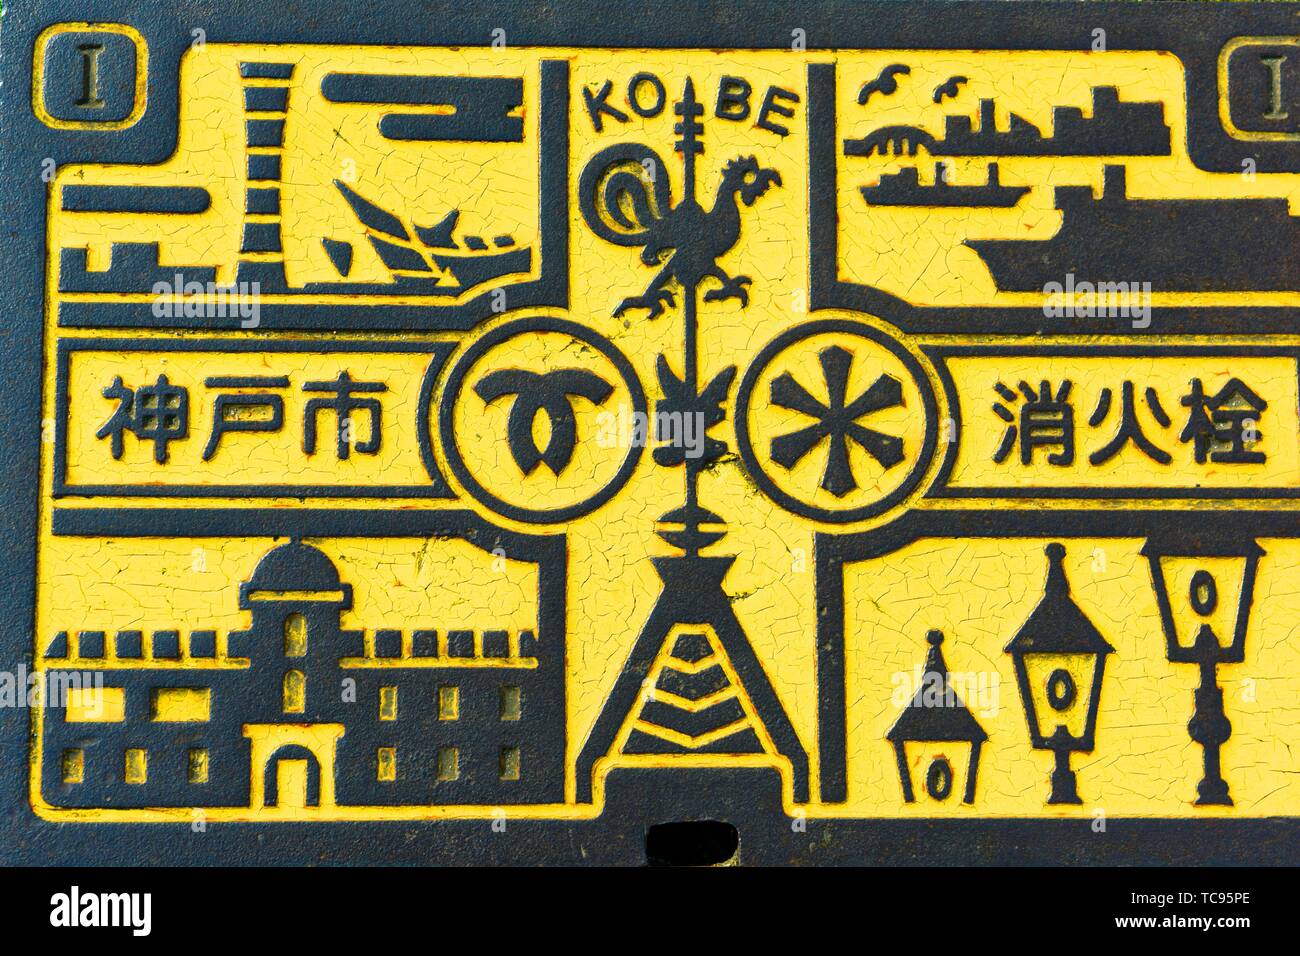 Signs and symbols of important places that represent Kobe put down onto a manhole along a street in Kobe city, Honshu, Japan, Asia. Stock Photo